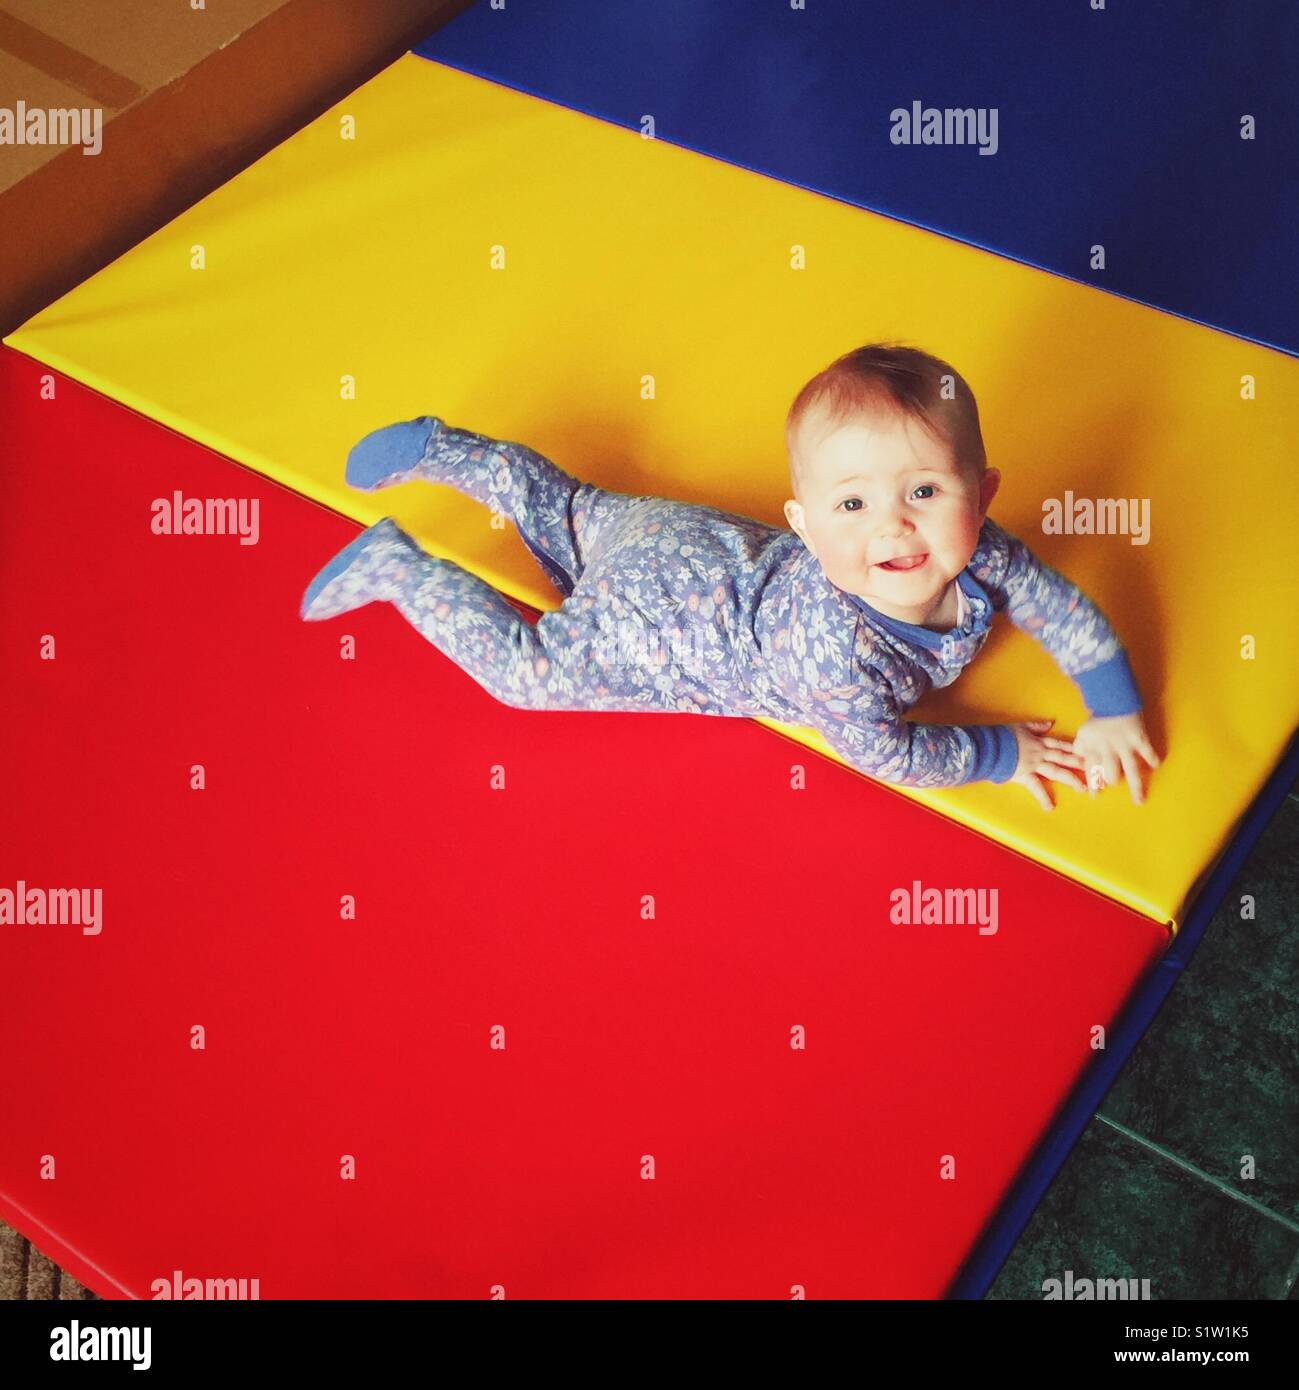 Baby girl crawling on high density multi-coloured gym mat Stock Photo